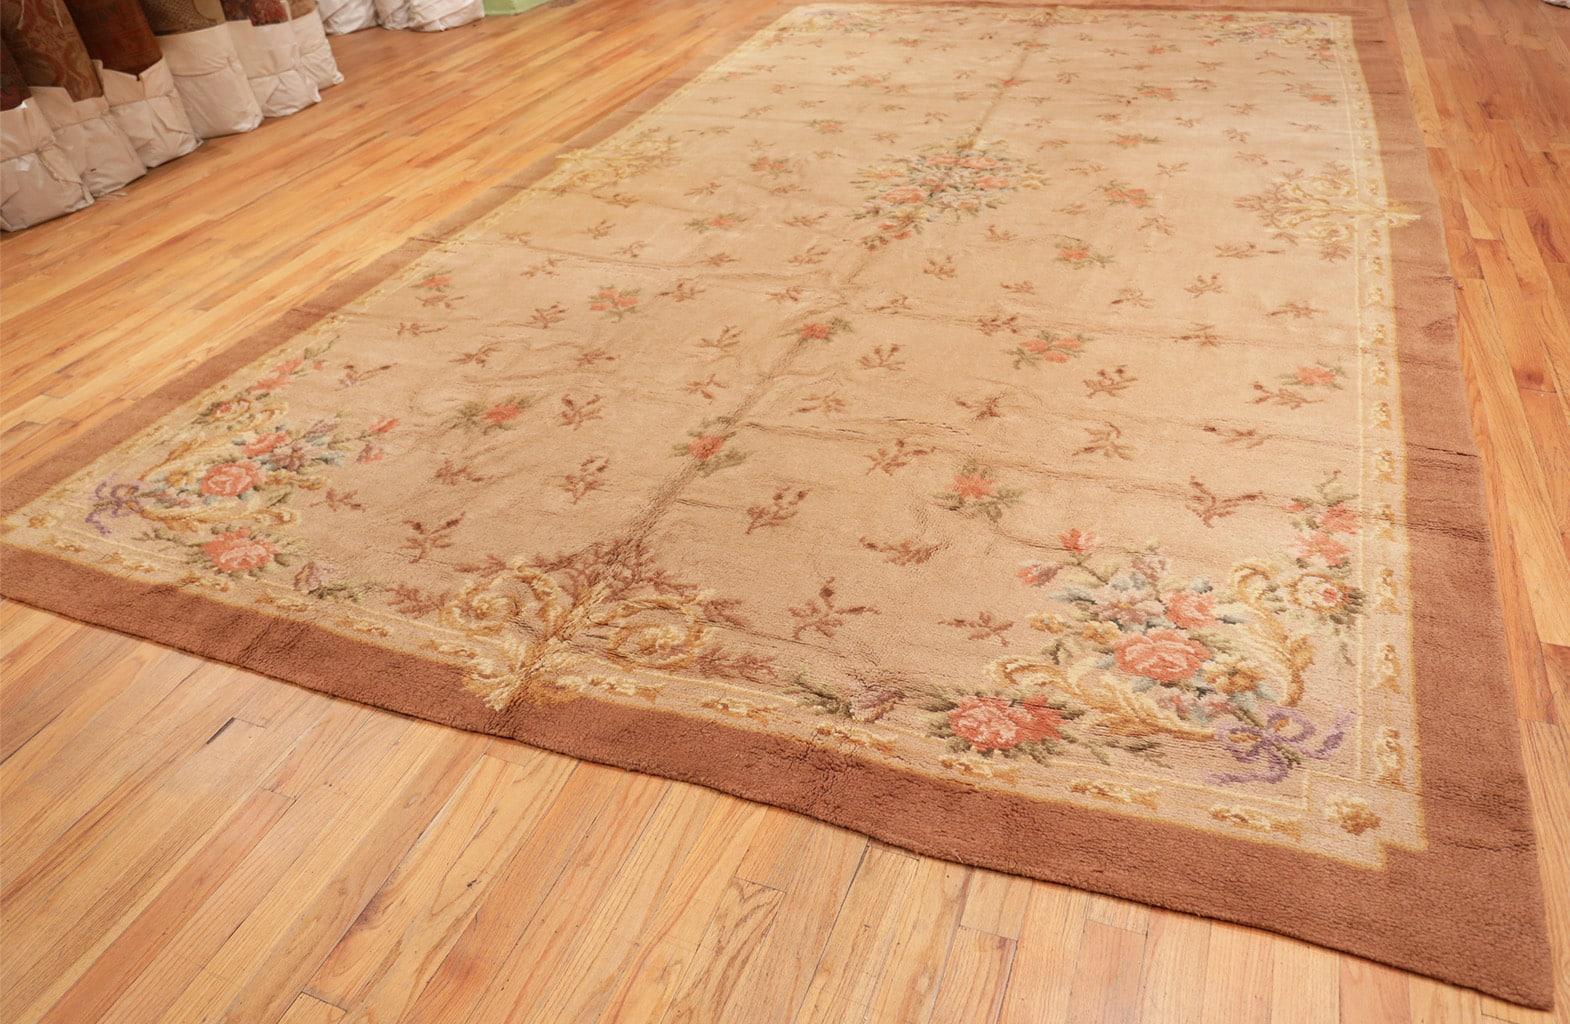 Hand-Knotted Large Antique Spanish Carpet. Size: 10 ft 7 in x 18 ft (3.23 m x 5.49 m)